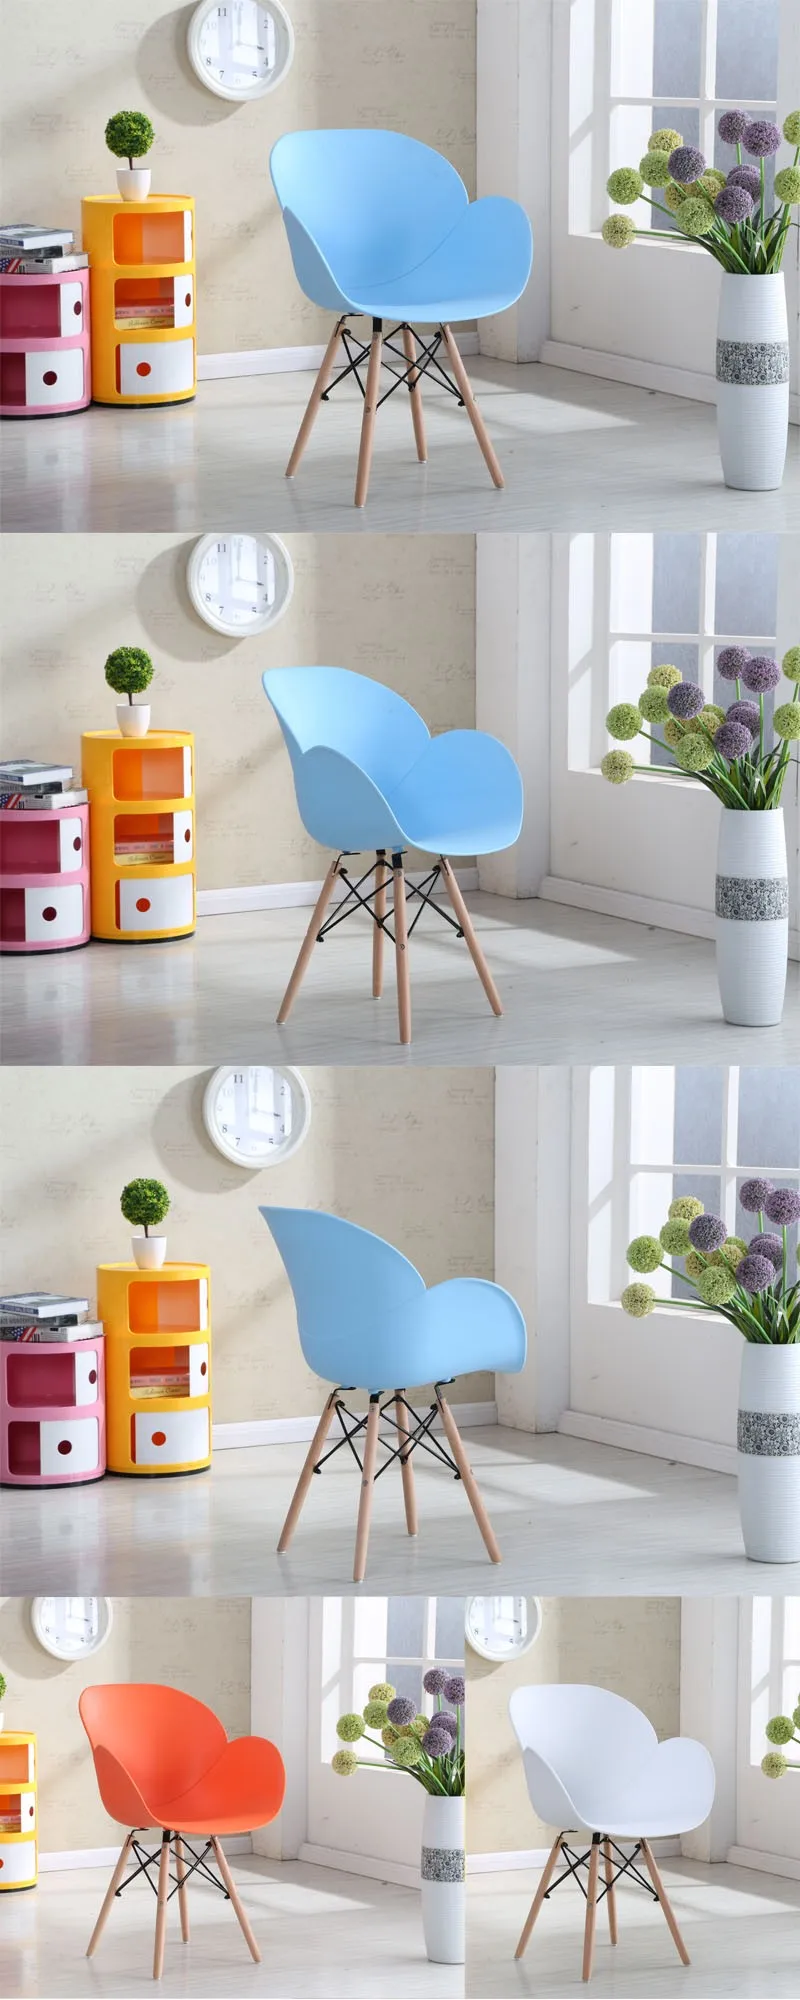 restaurant unstackable dining chair made in China.jpg